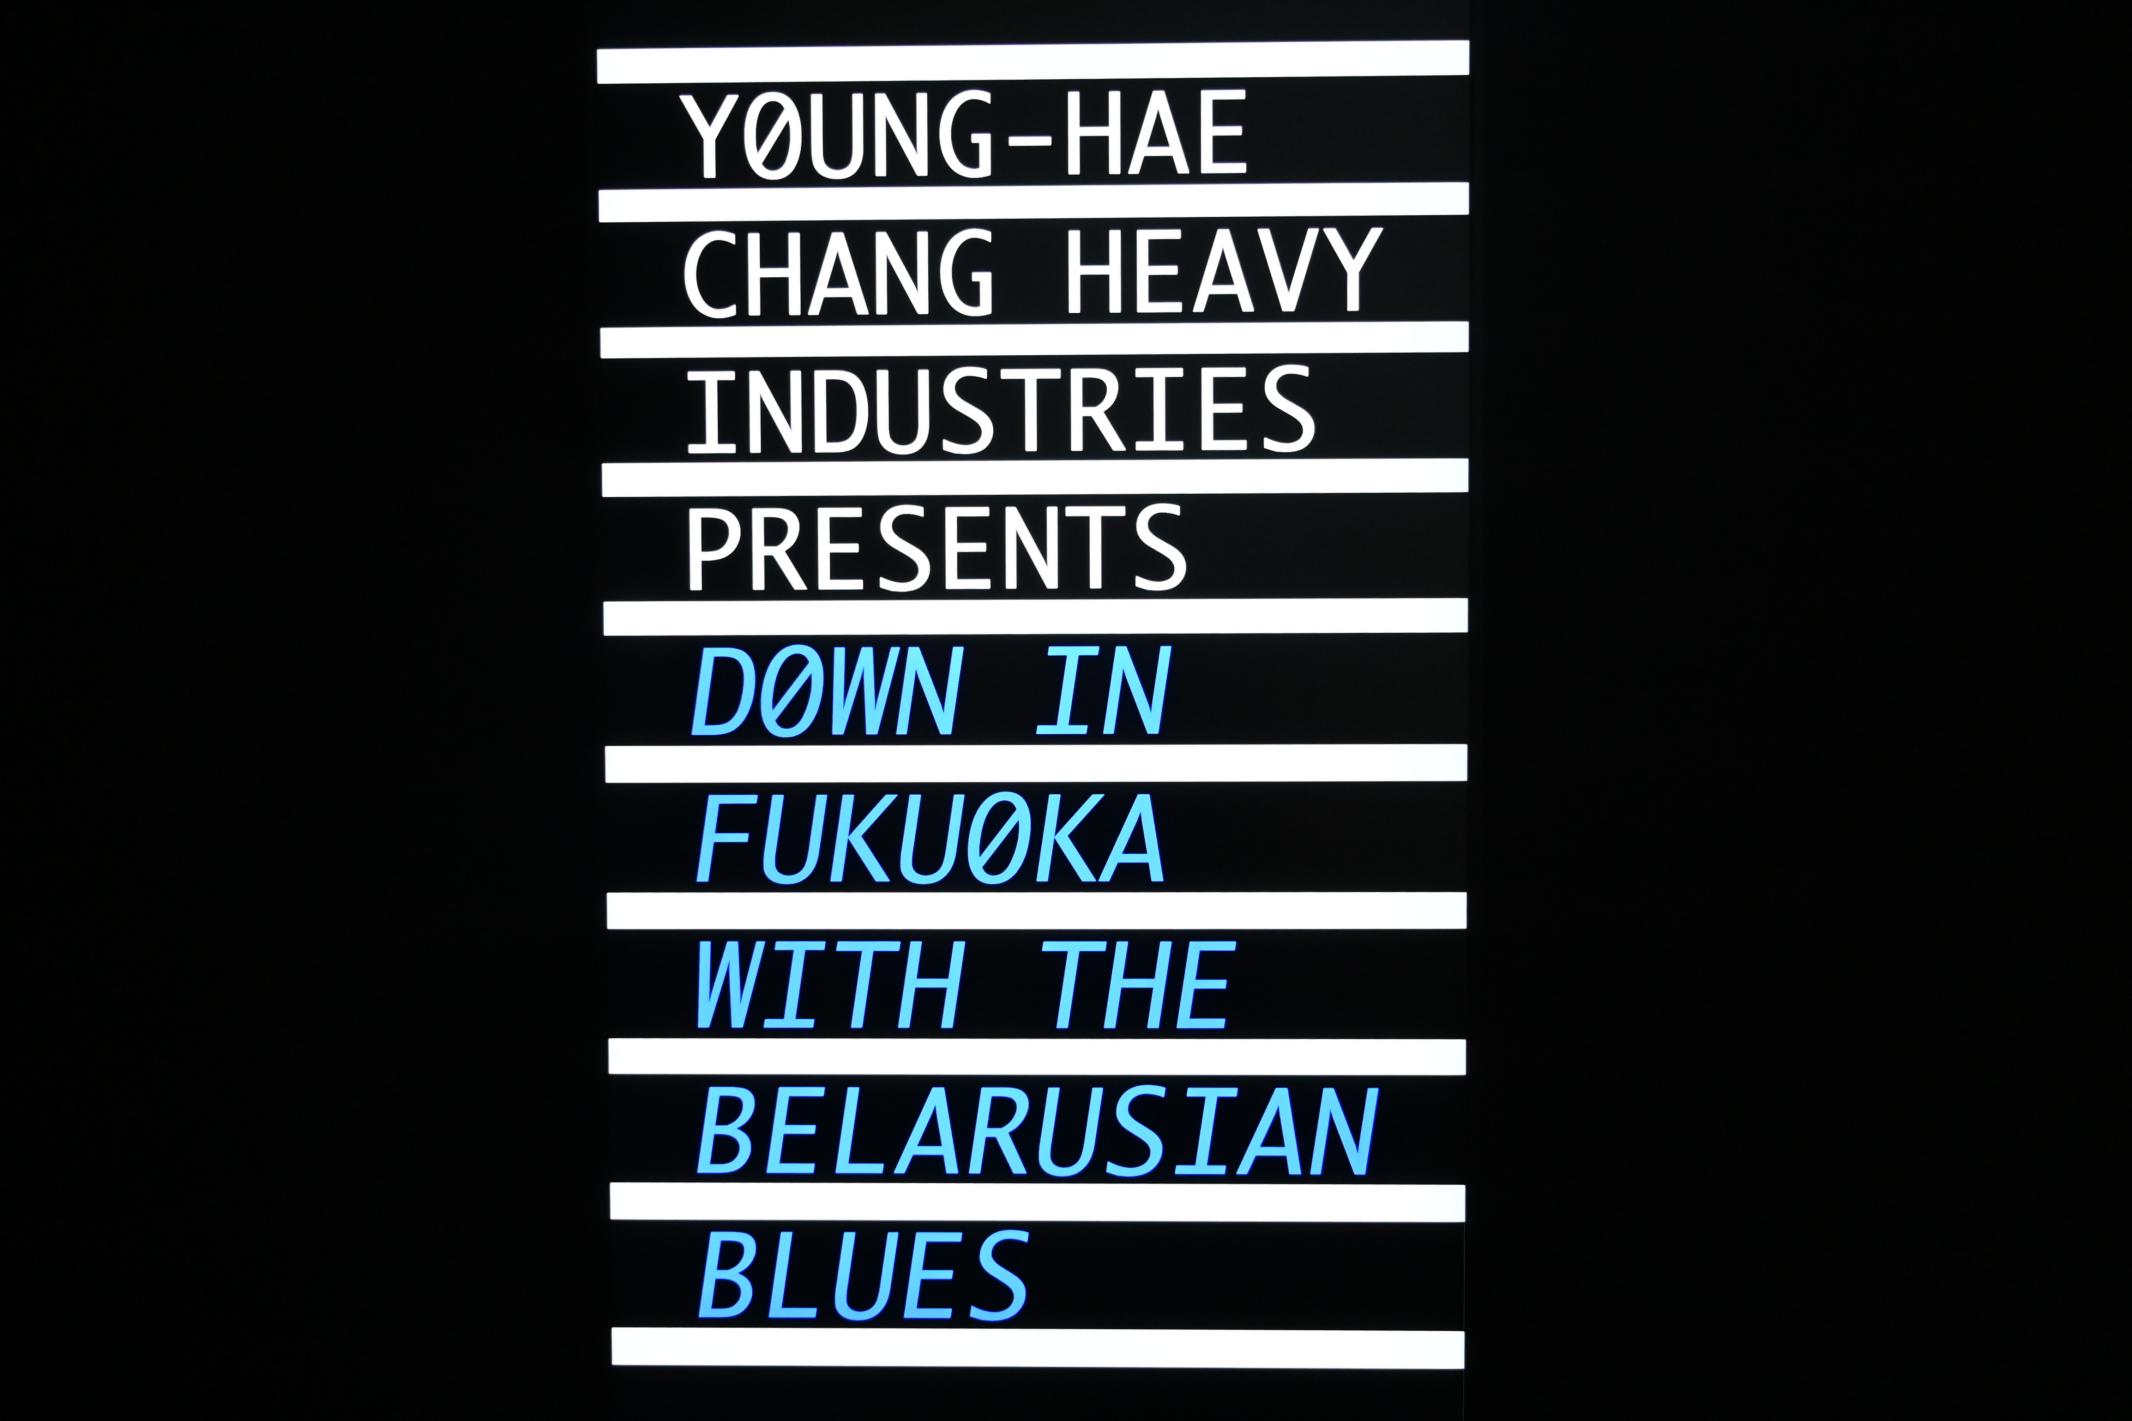 Young-Hae Chang Heavy Industries (2010–2020), Young-Hae Chang Heavy Industries präsentiert: Unten in Fukuoka mit dem weißrussischen Blues, London, Tate Gallery of Modern Art (Tate Modern), Media Networks 10, 2010